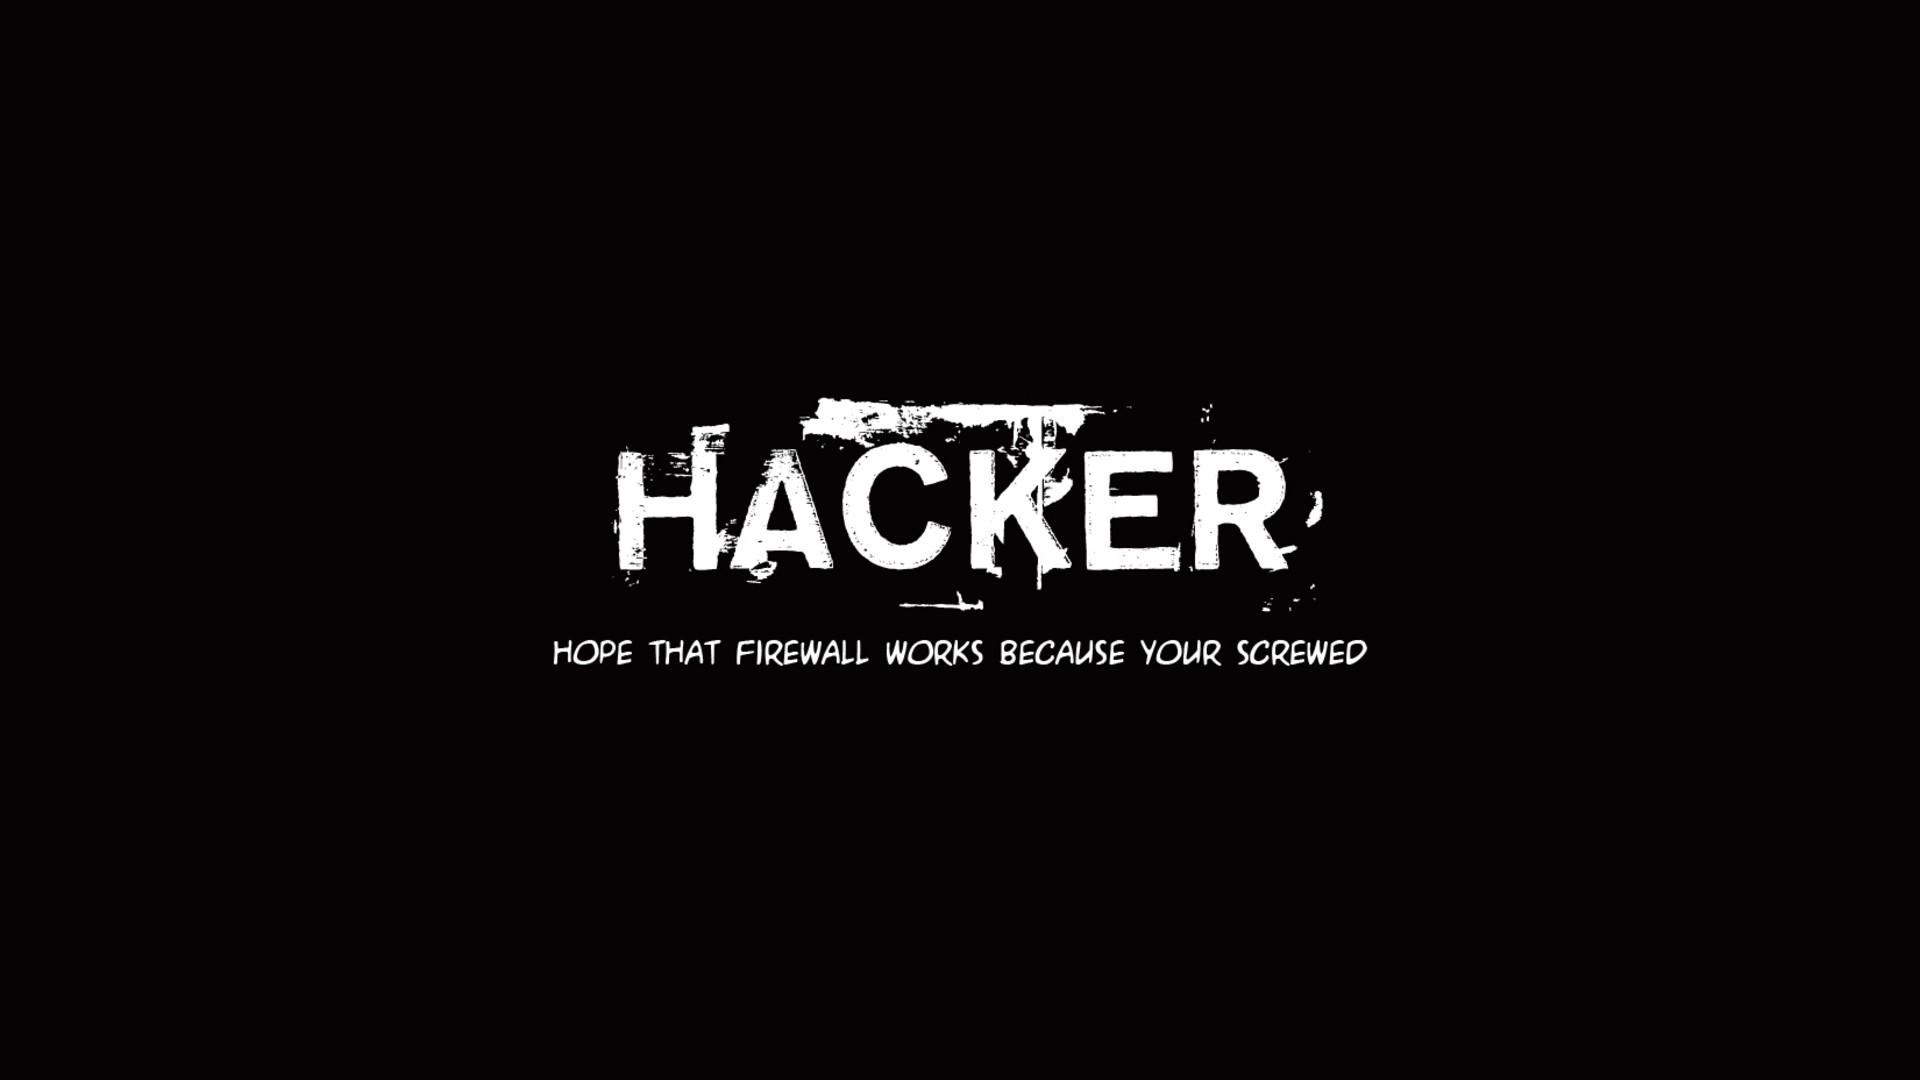 Hacker Background   Funny Twitter Backgrounds 1920x1080